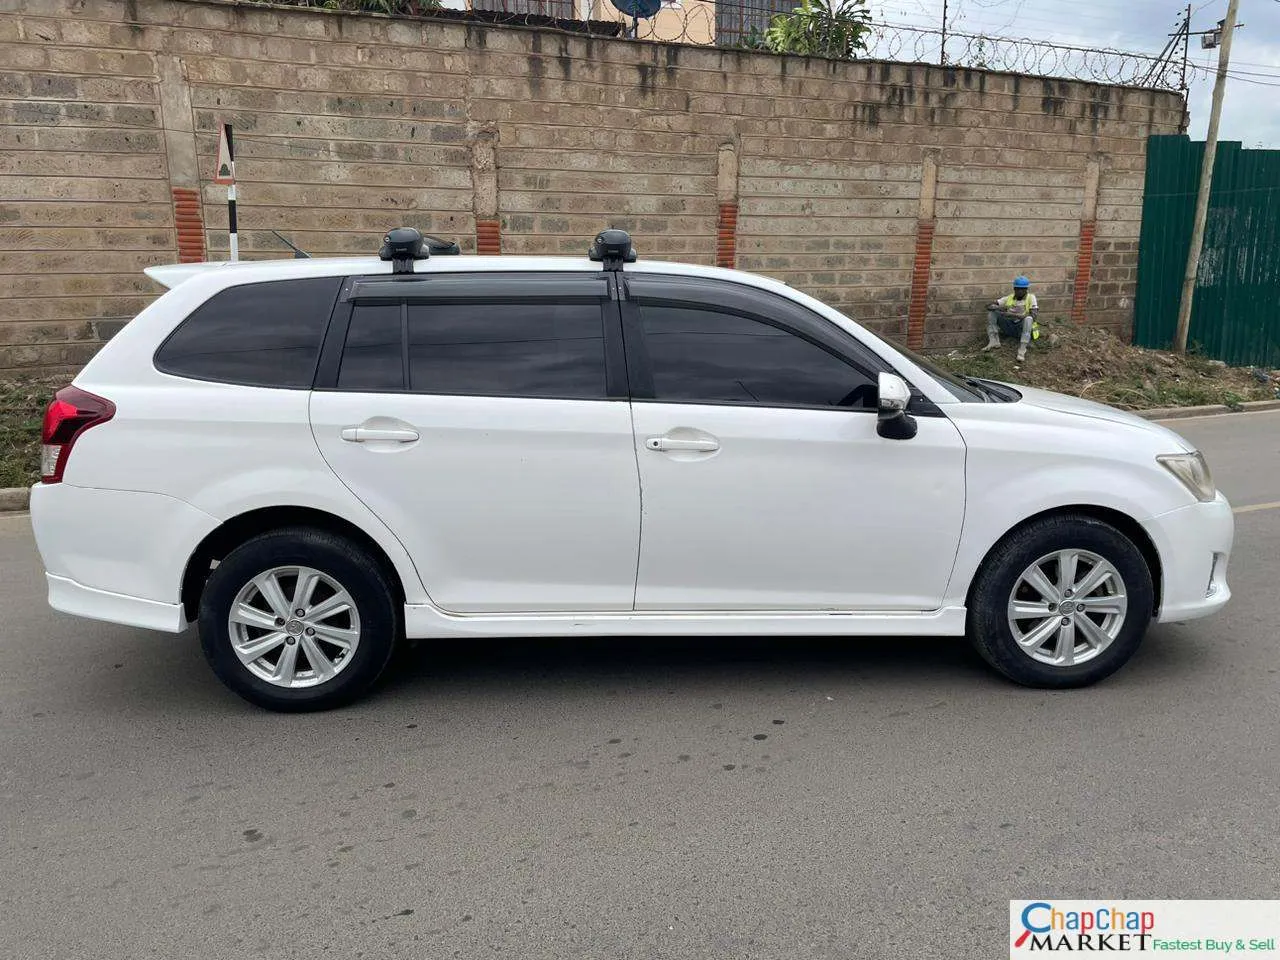 Cars Cars For Sale/Vehicles-Toyota fielder for sale in Kenya You Pay 30% Deposit Trade in OK Wow 9